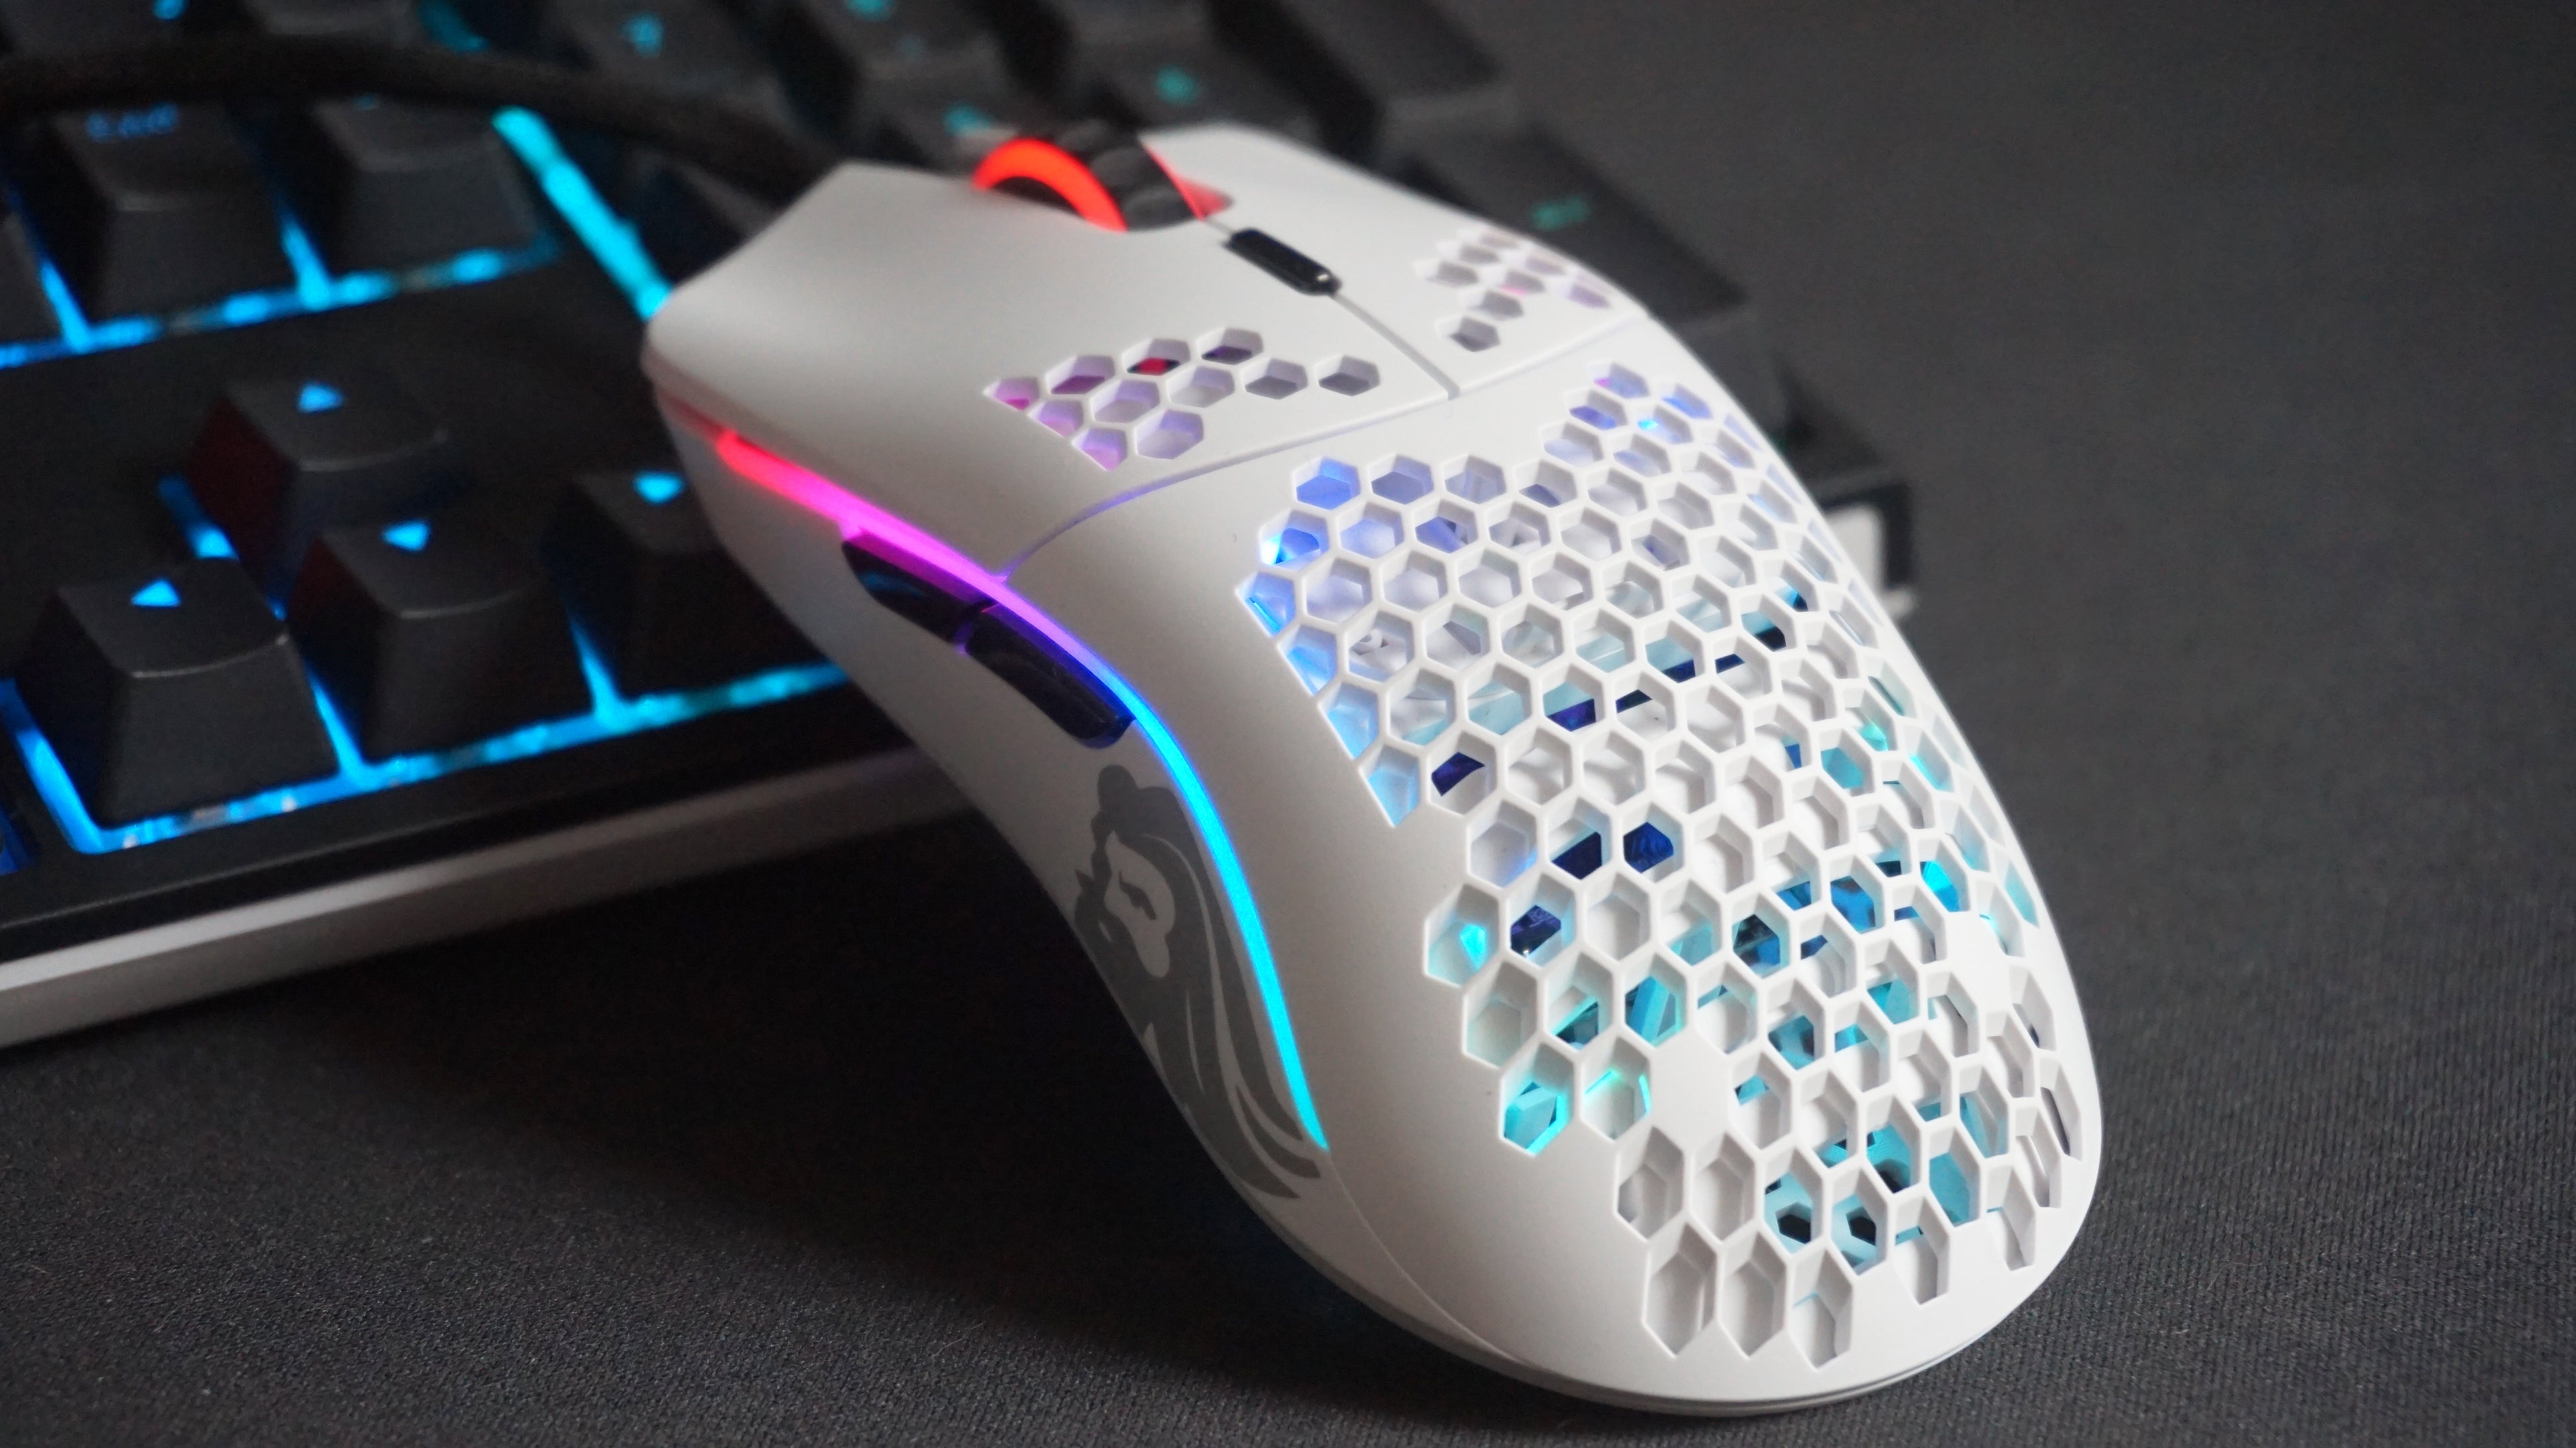 Image for Holey moley, Glorious' Model O- mouse is an absolute beaut